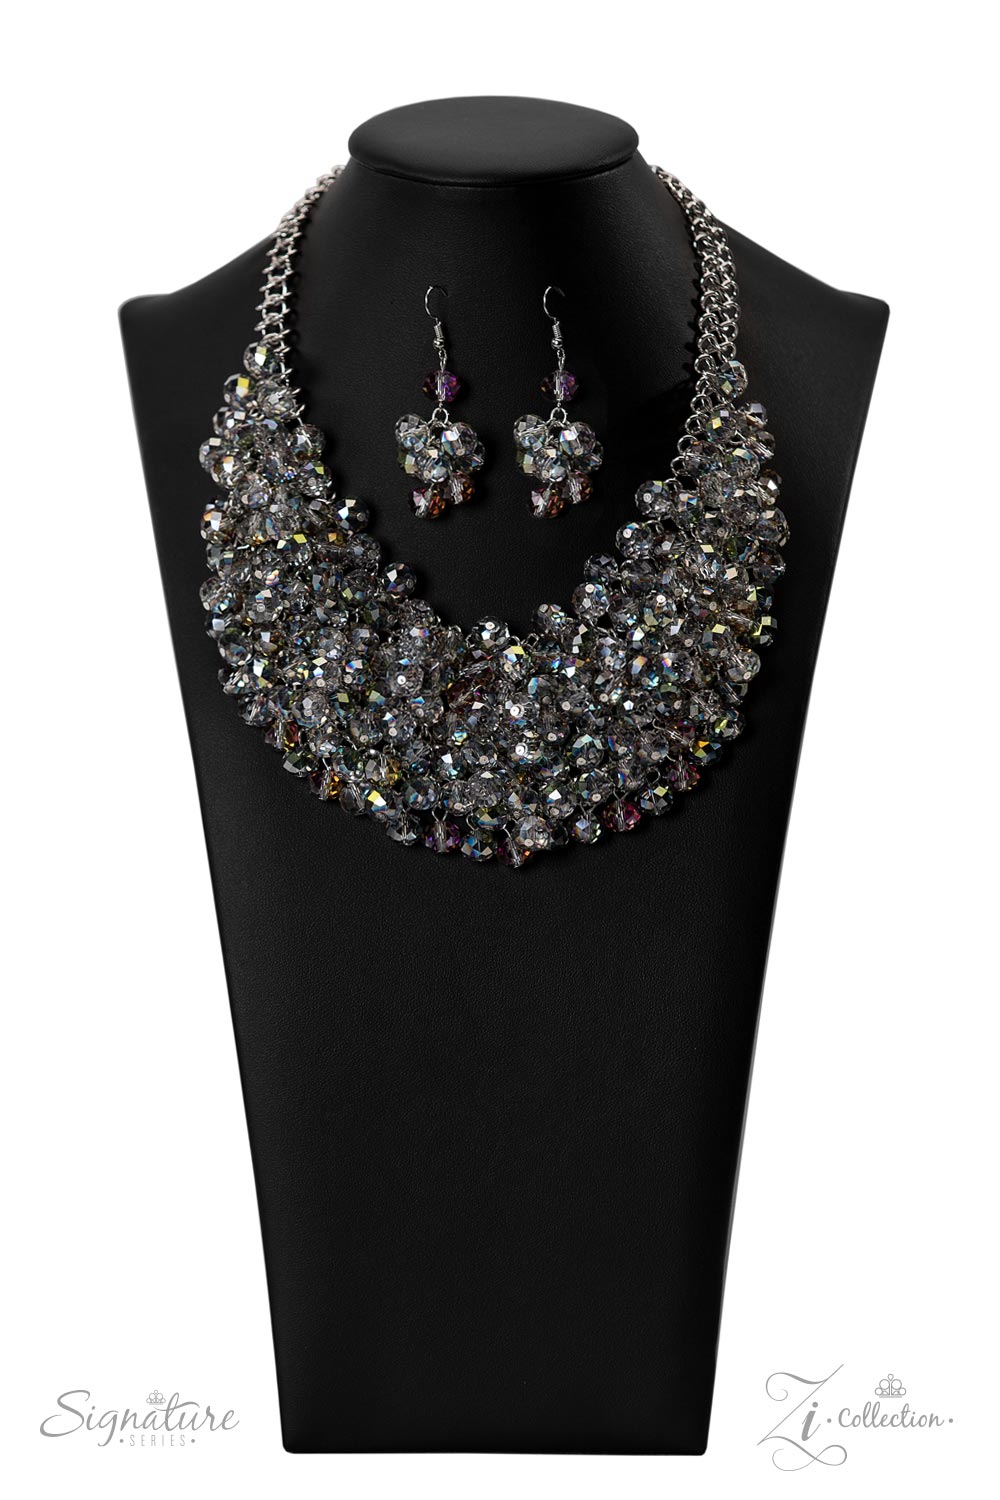 The Tanger ZI Collection necklace E012